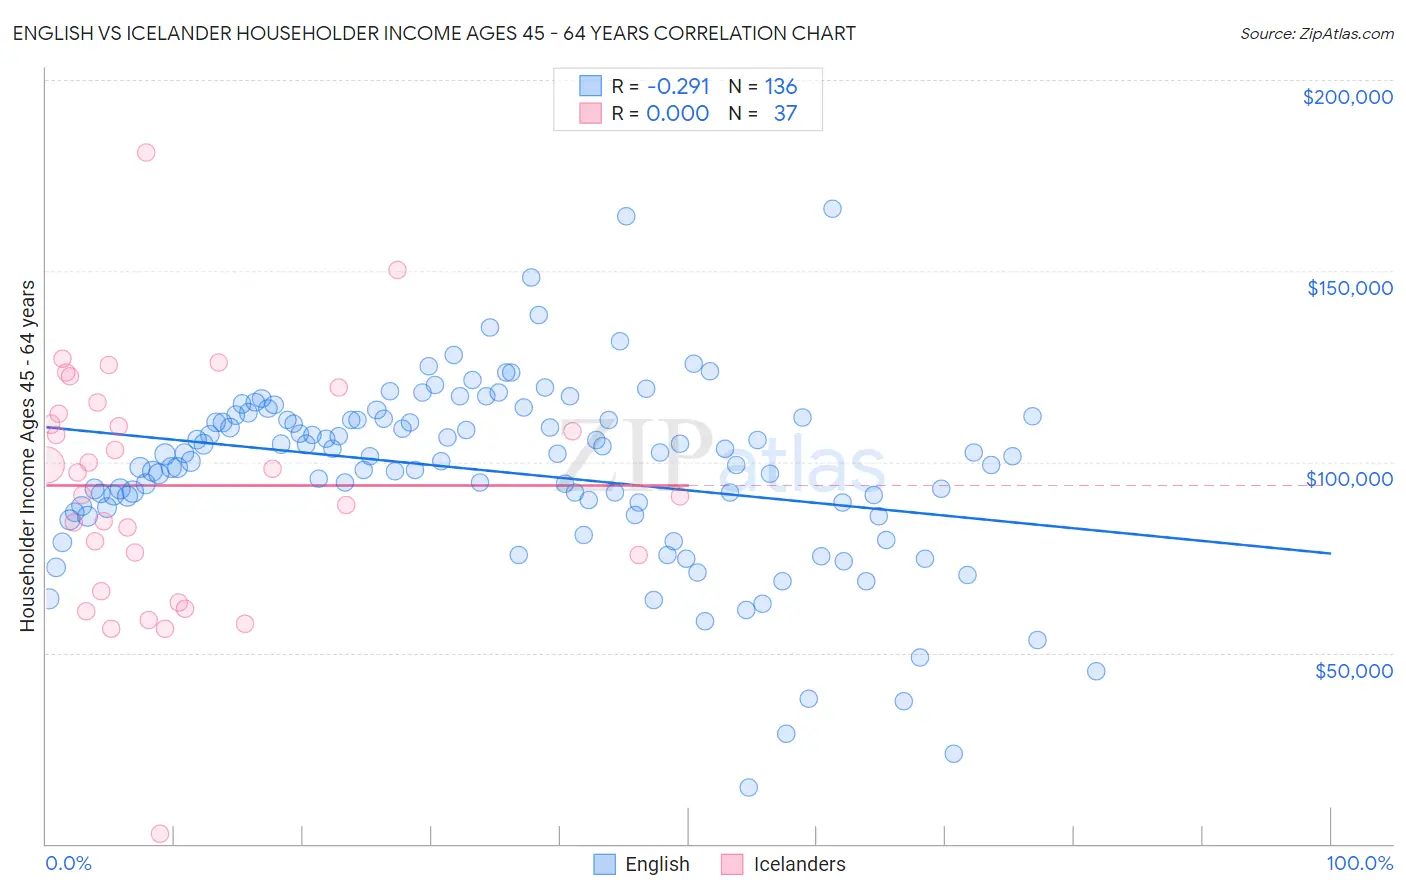 English vs Icelander Householder Income Ages 45 - 64 years